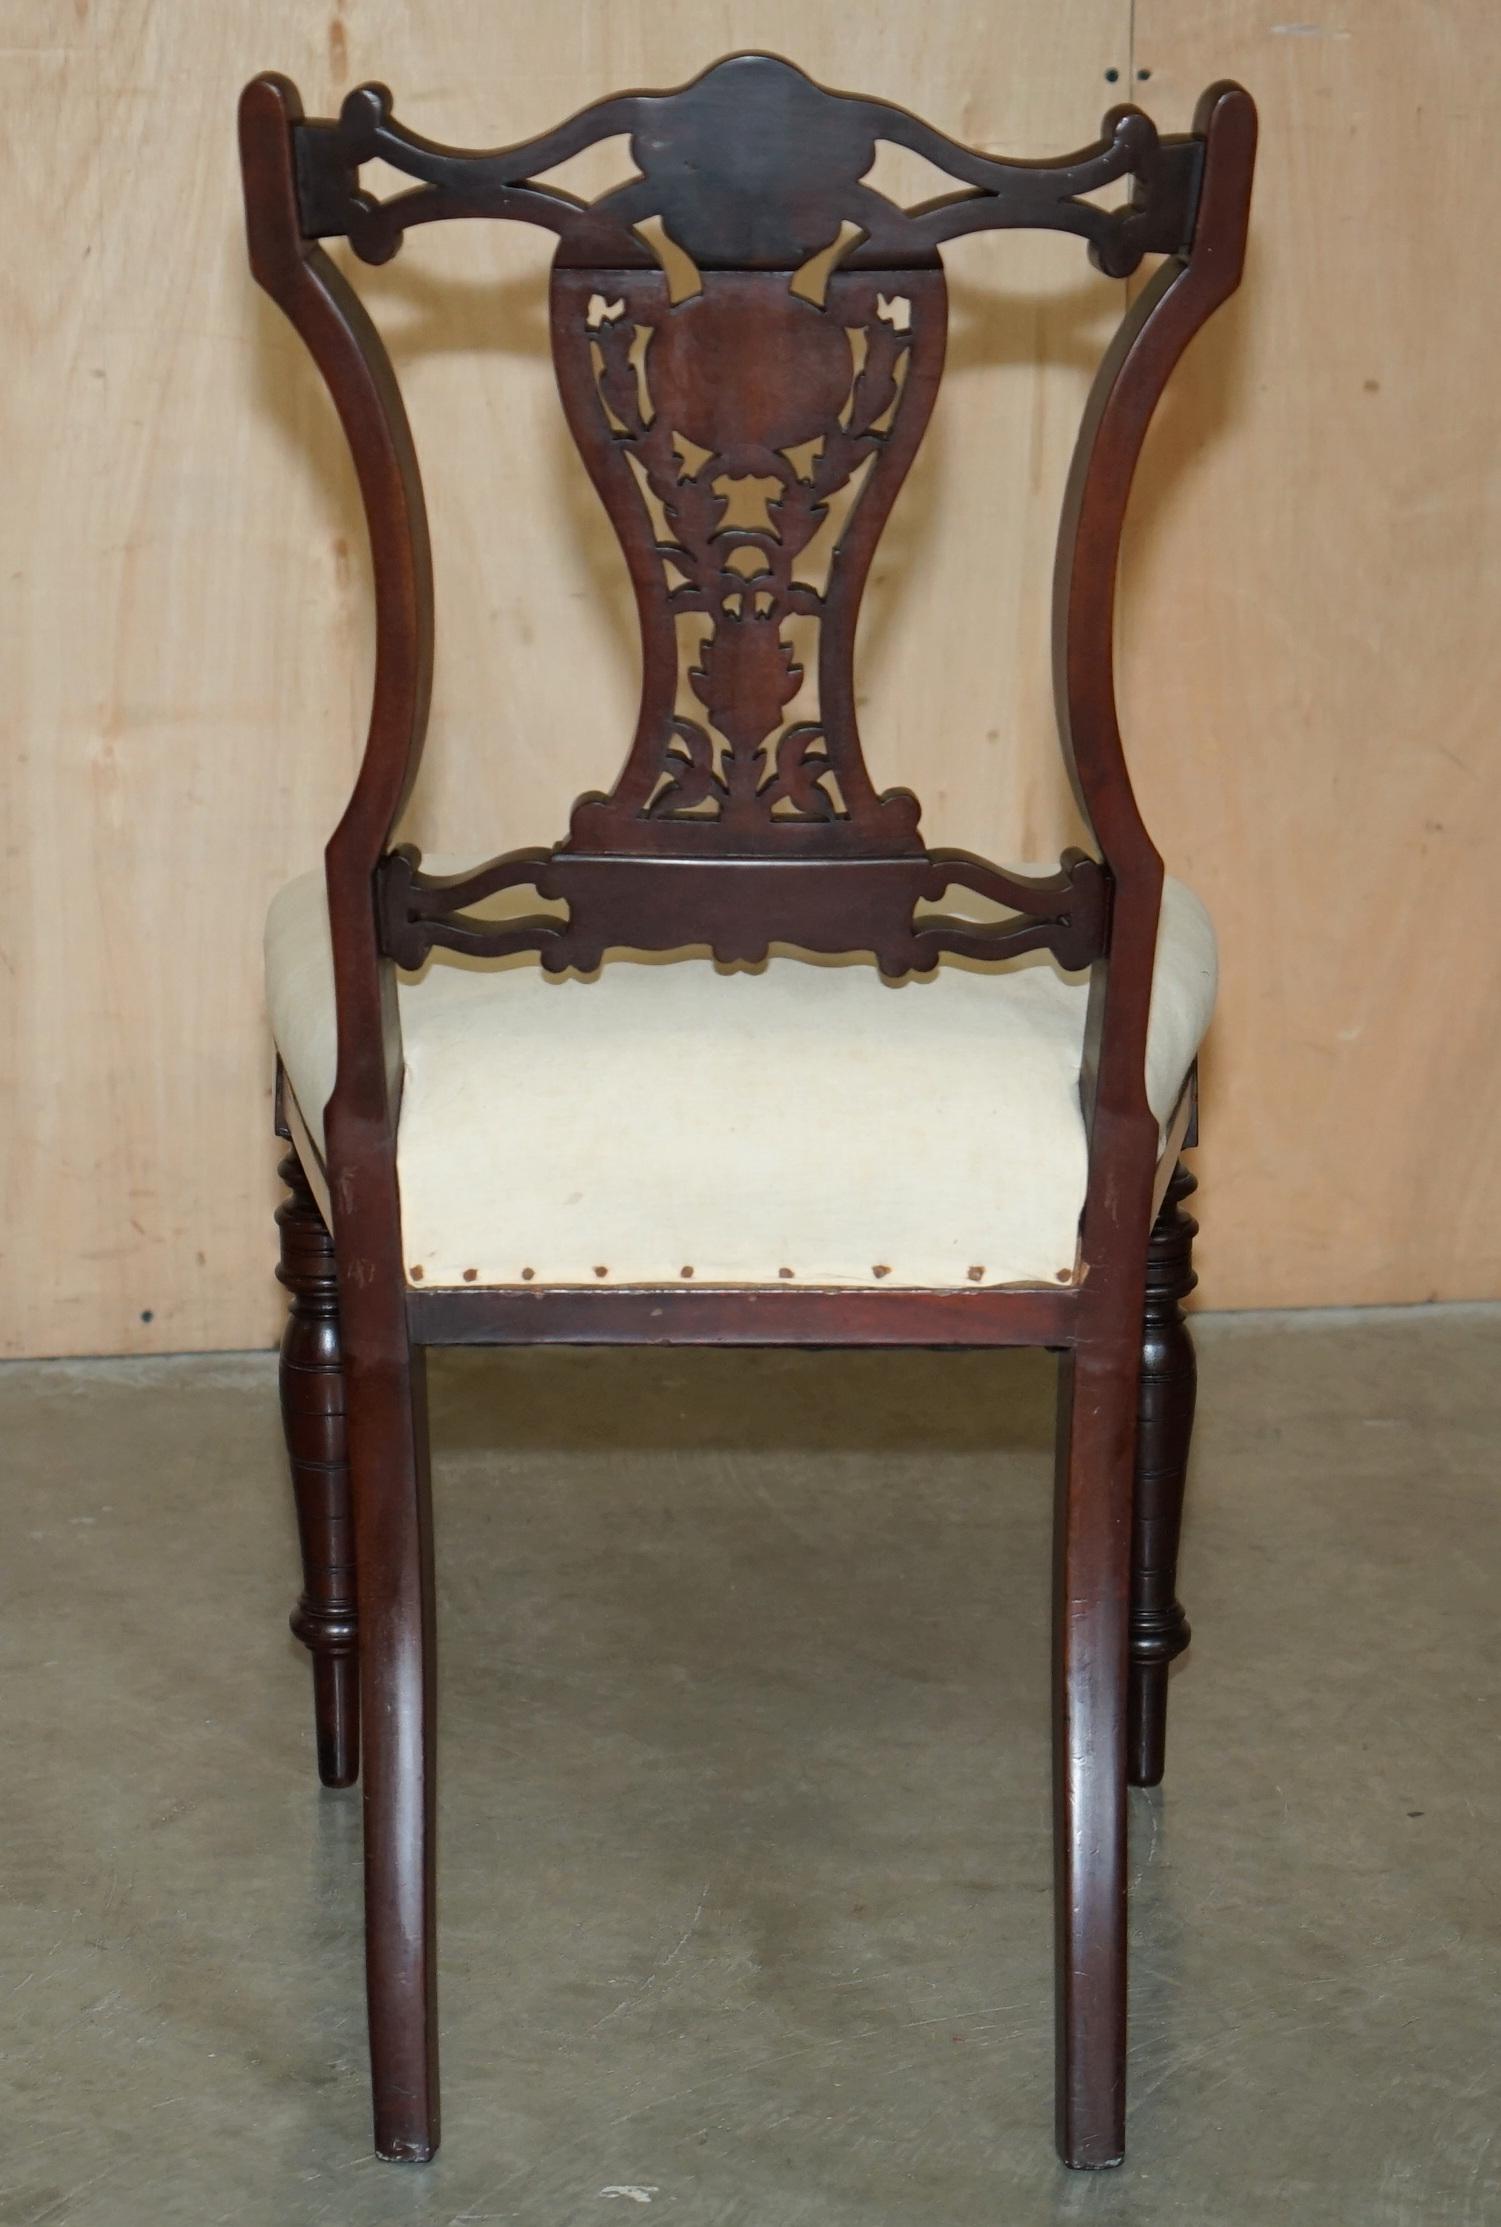 ANTIQUE VICTORIAN HARDWOOD SALON CHAIR WITH STUNNING INLAiD BACK PANEL For Sale 8